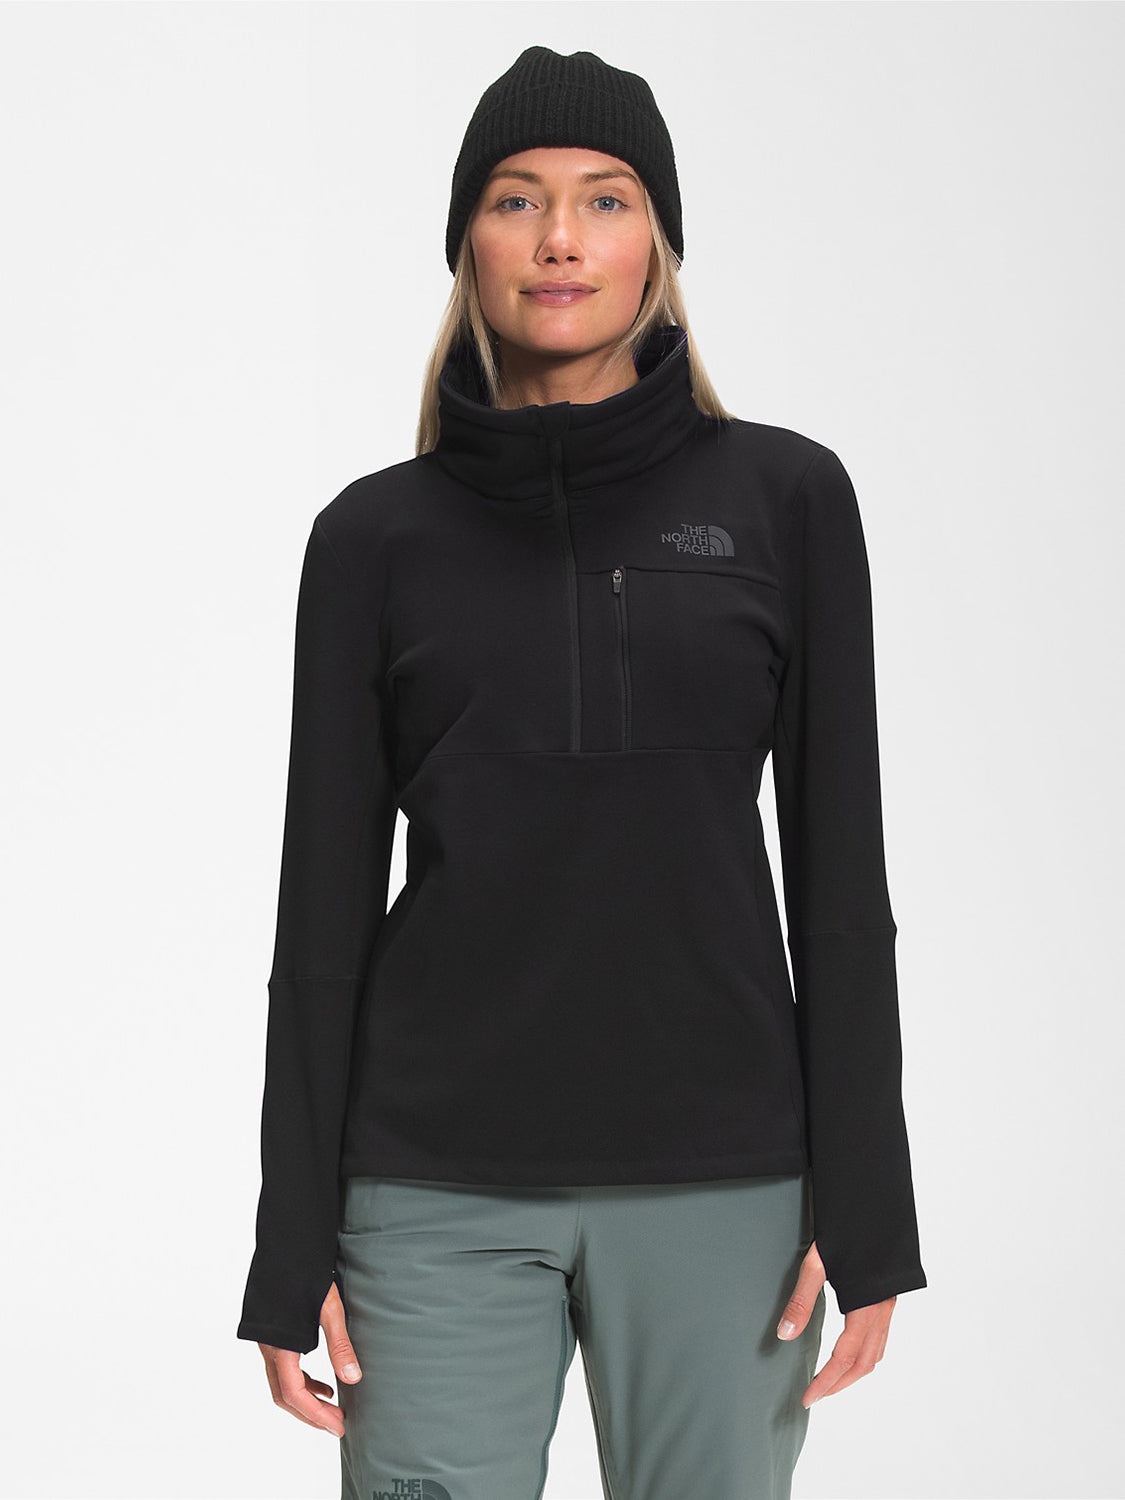 The North Face Womens TAGEN 1/4 ZIP FLEECE Pullover - Fresh Skis